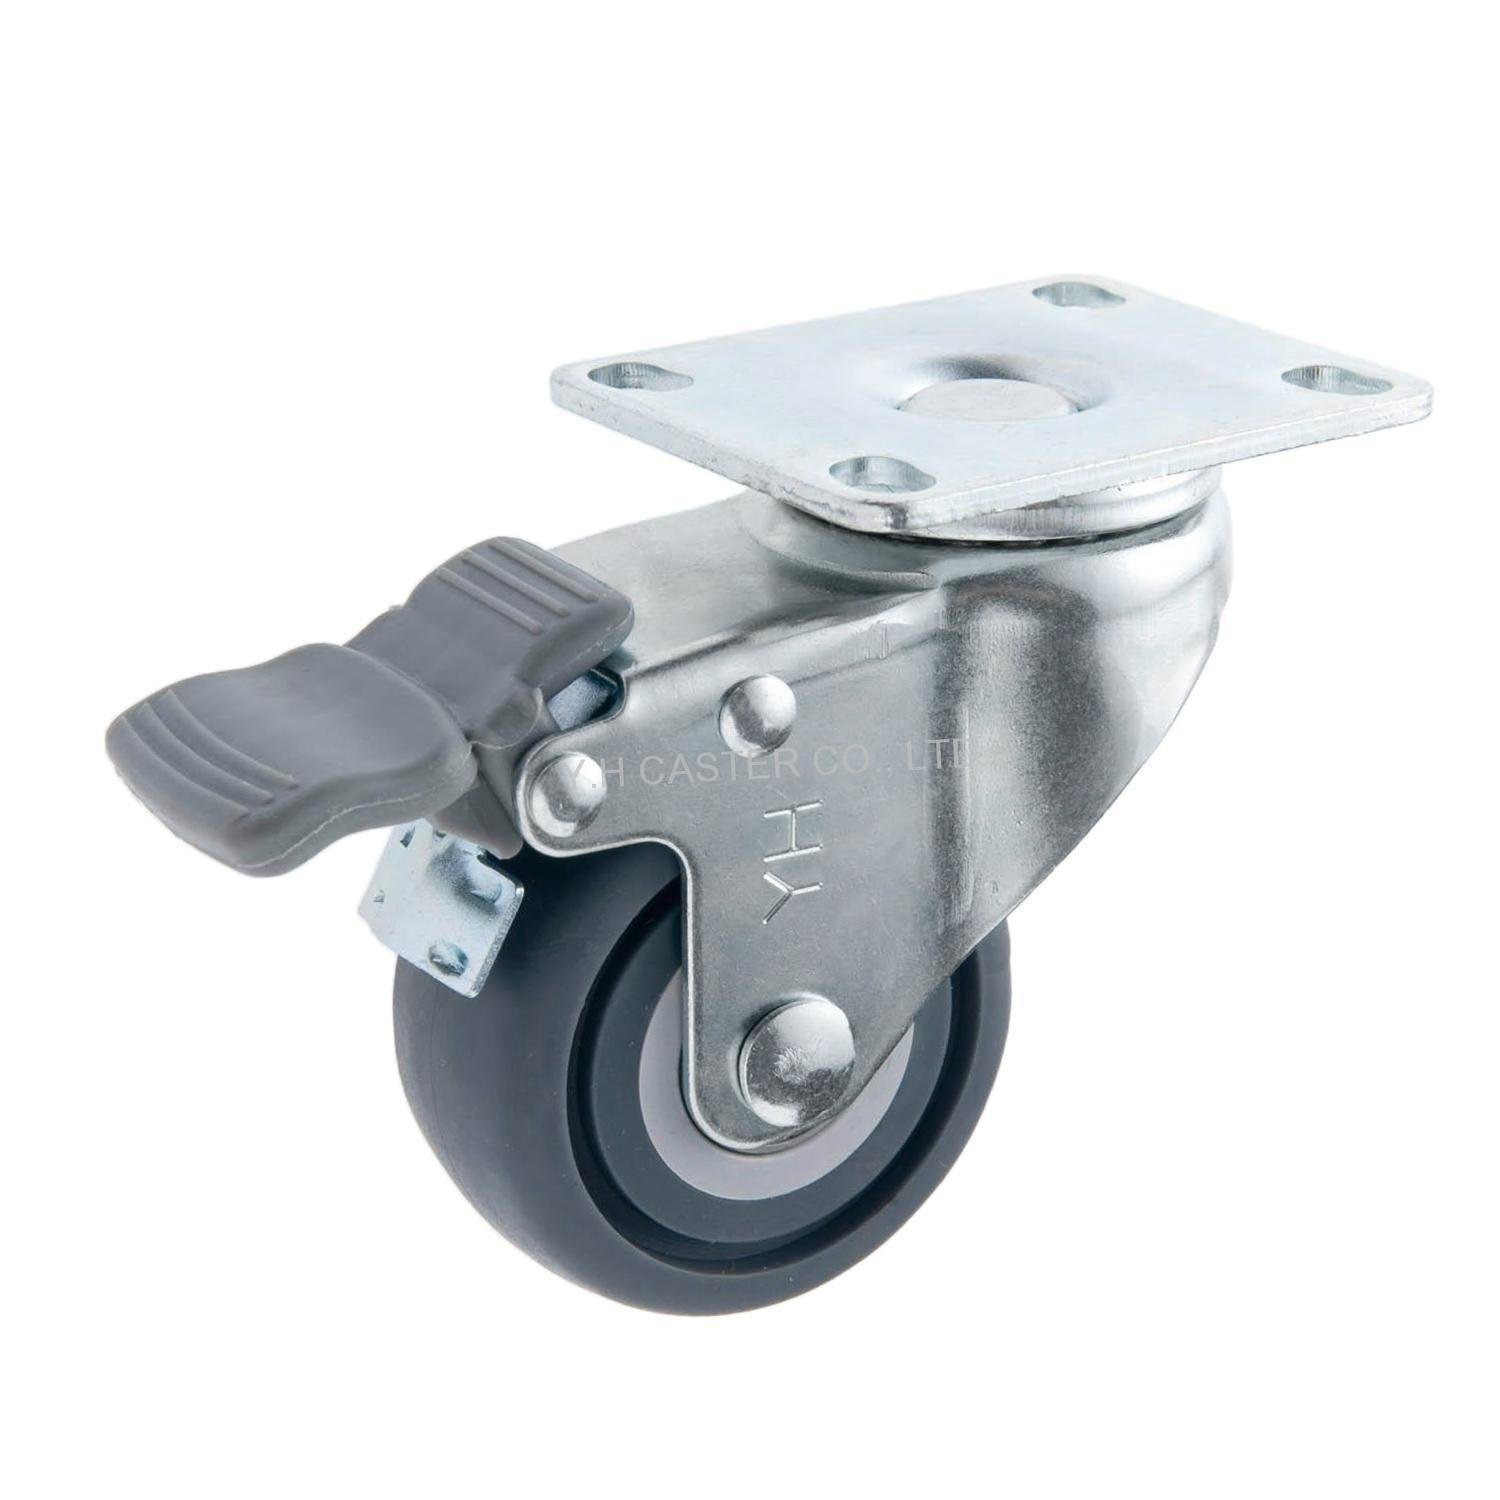 25 Series 2.5" TPR Caster (Plate with Brake)